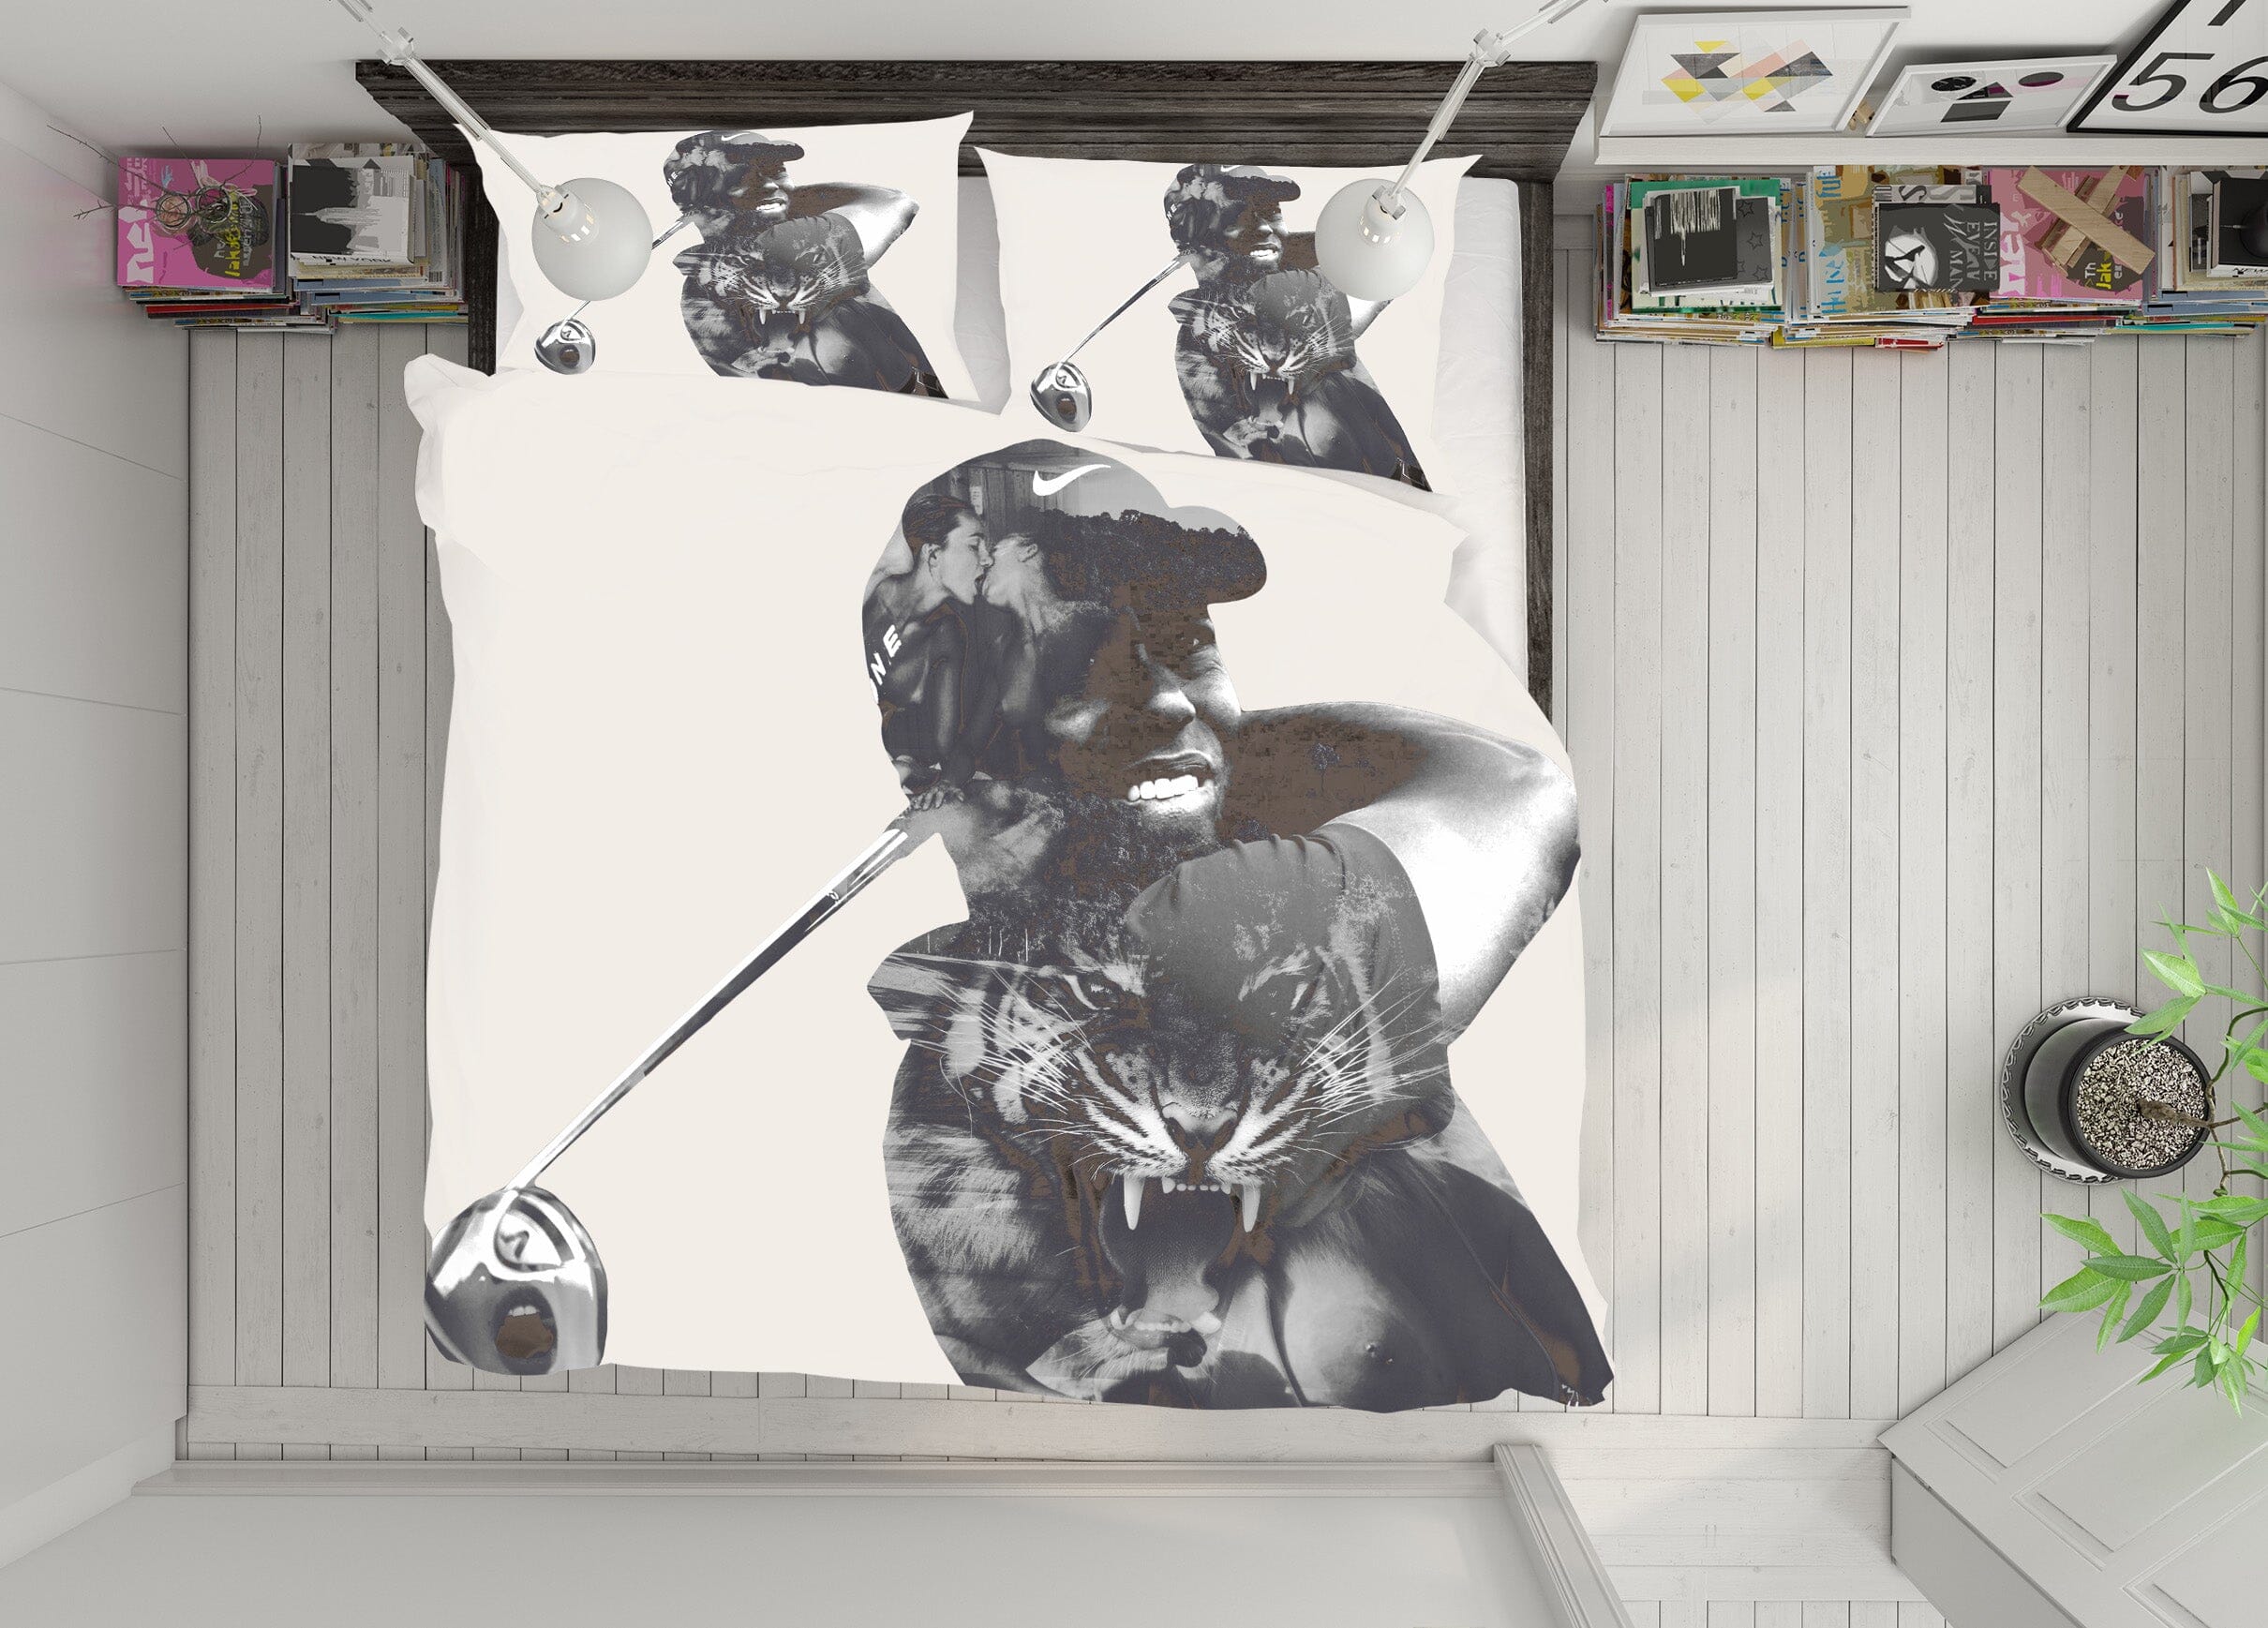 3D Tigerwoods 2009 Marco Cavazzana Bedding Bed Pillowcases Quilt Quiet Covers AJ Creativity Home 